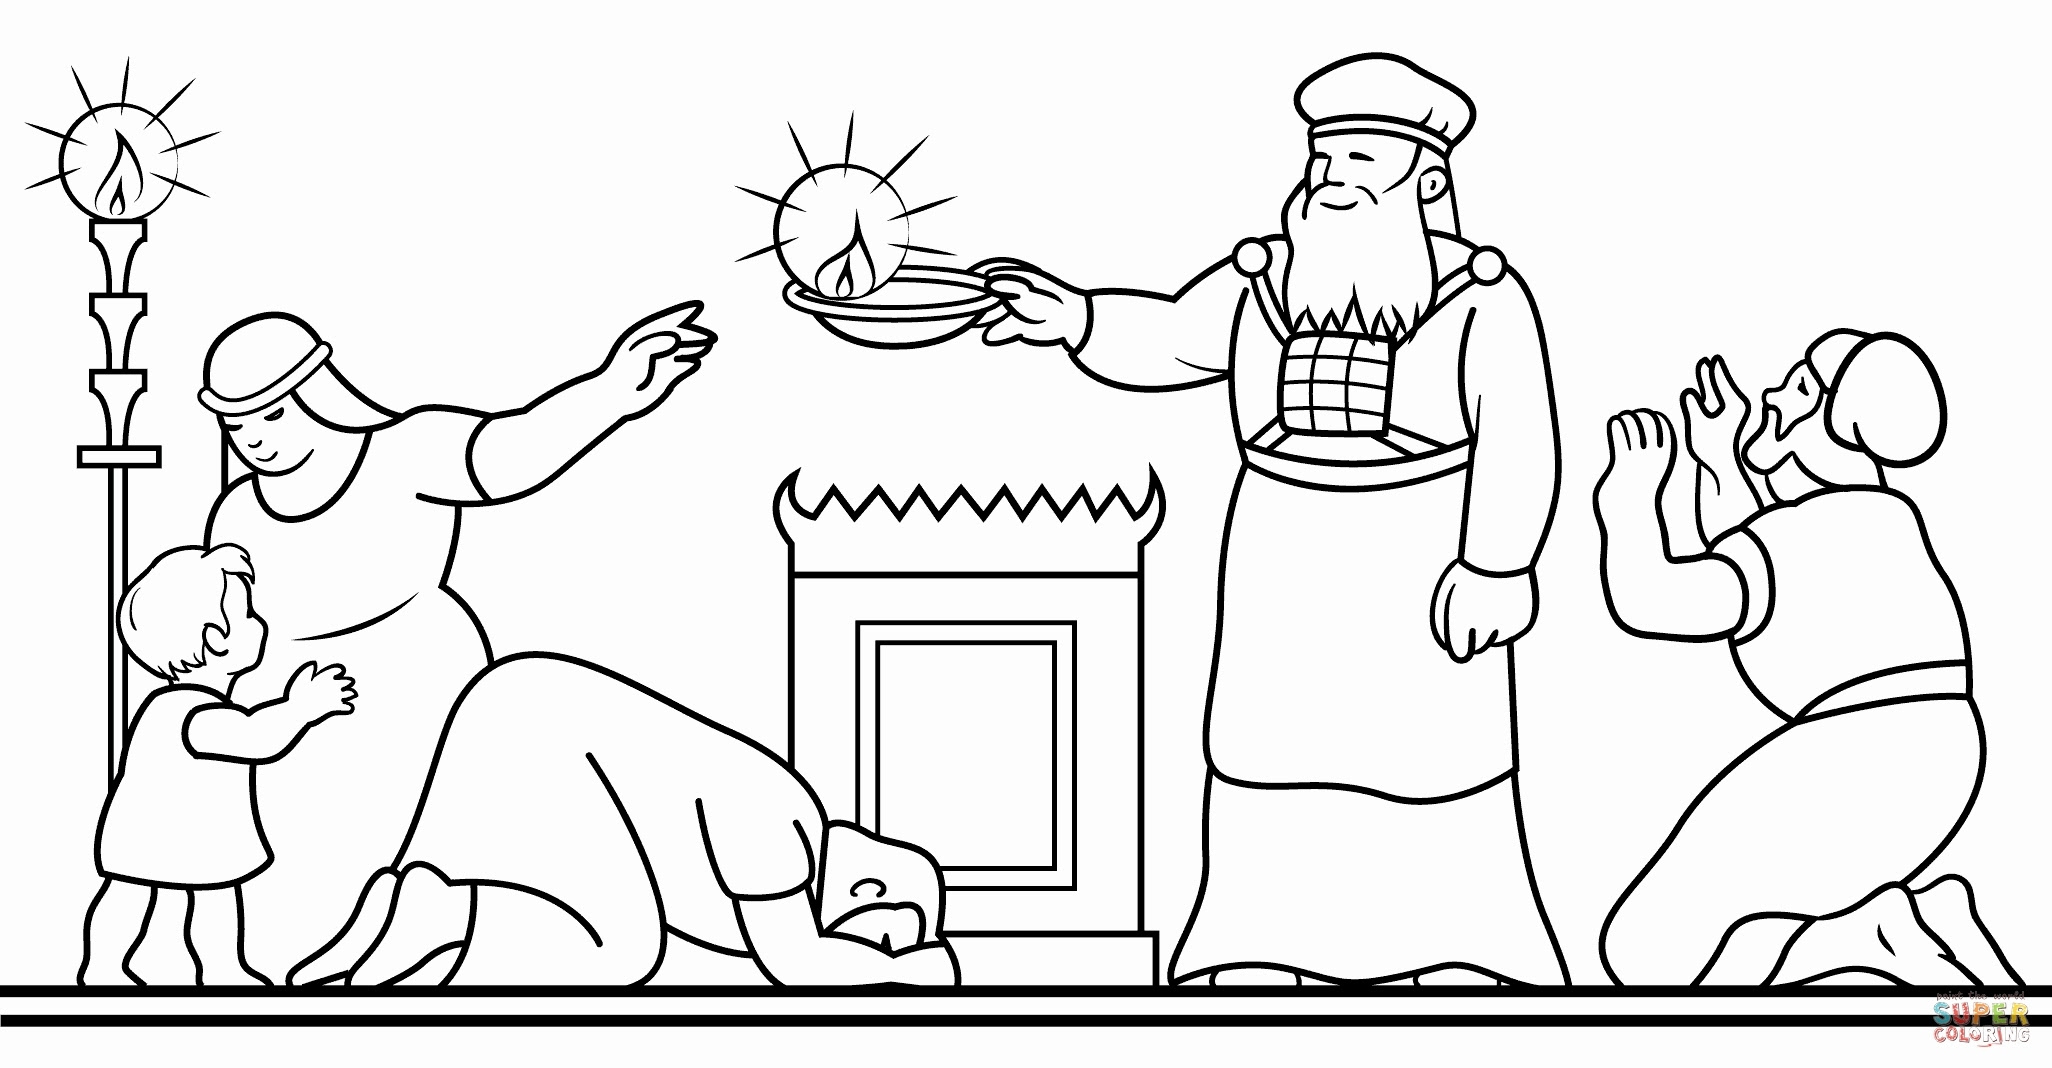 35 Yom Kippur Coloring Pages - Free Printable Coloring Pages